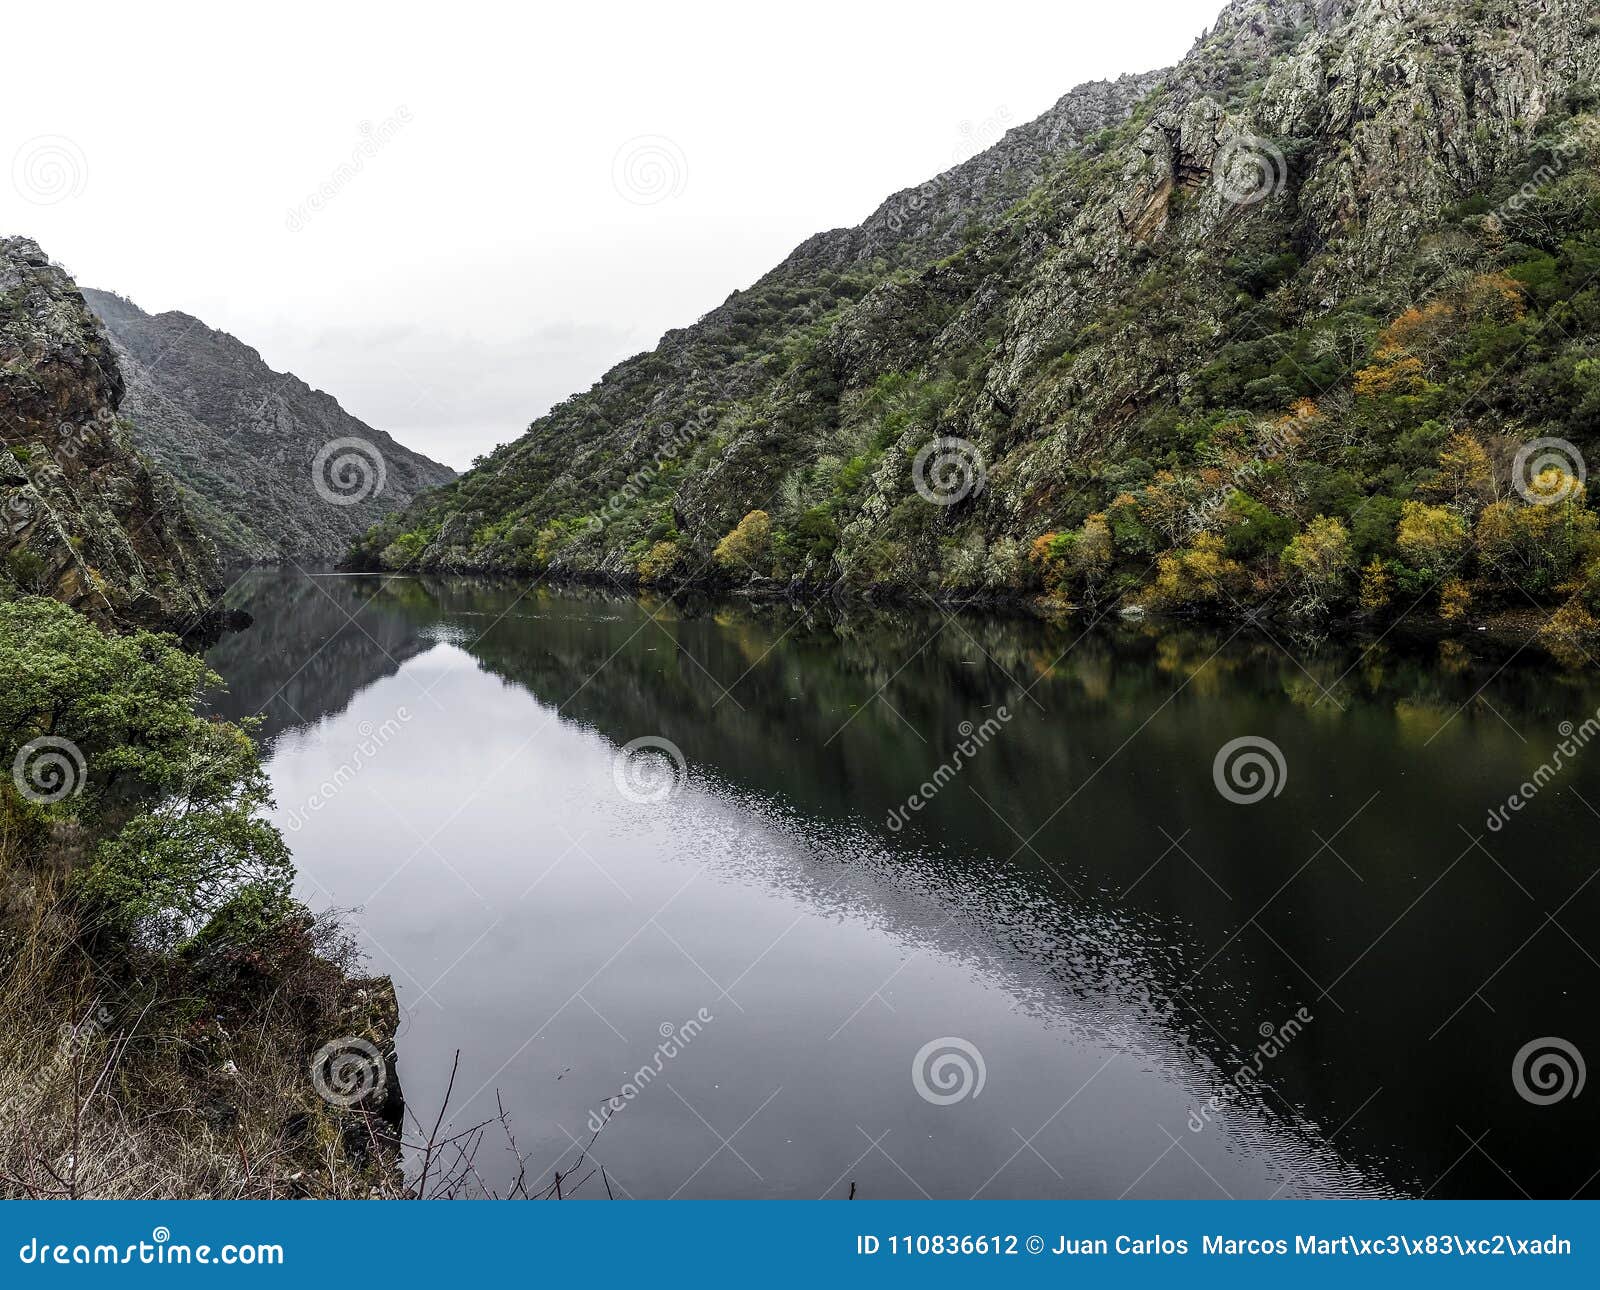 sil river canyons in the ribeira sacra